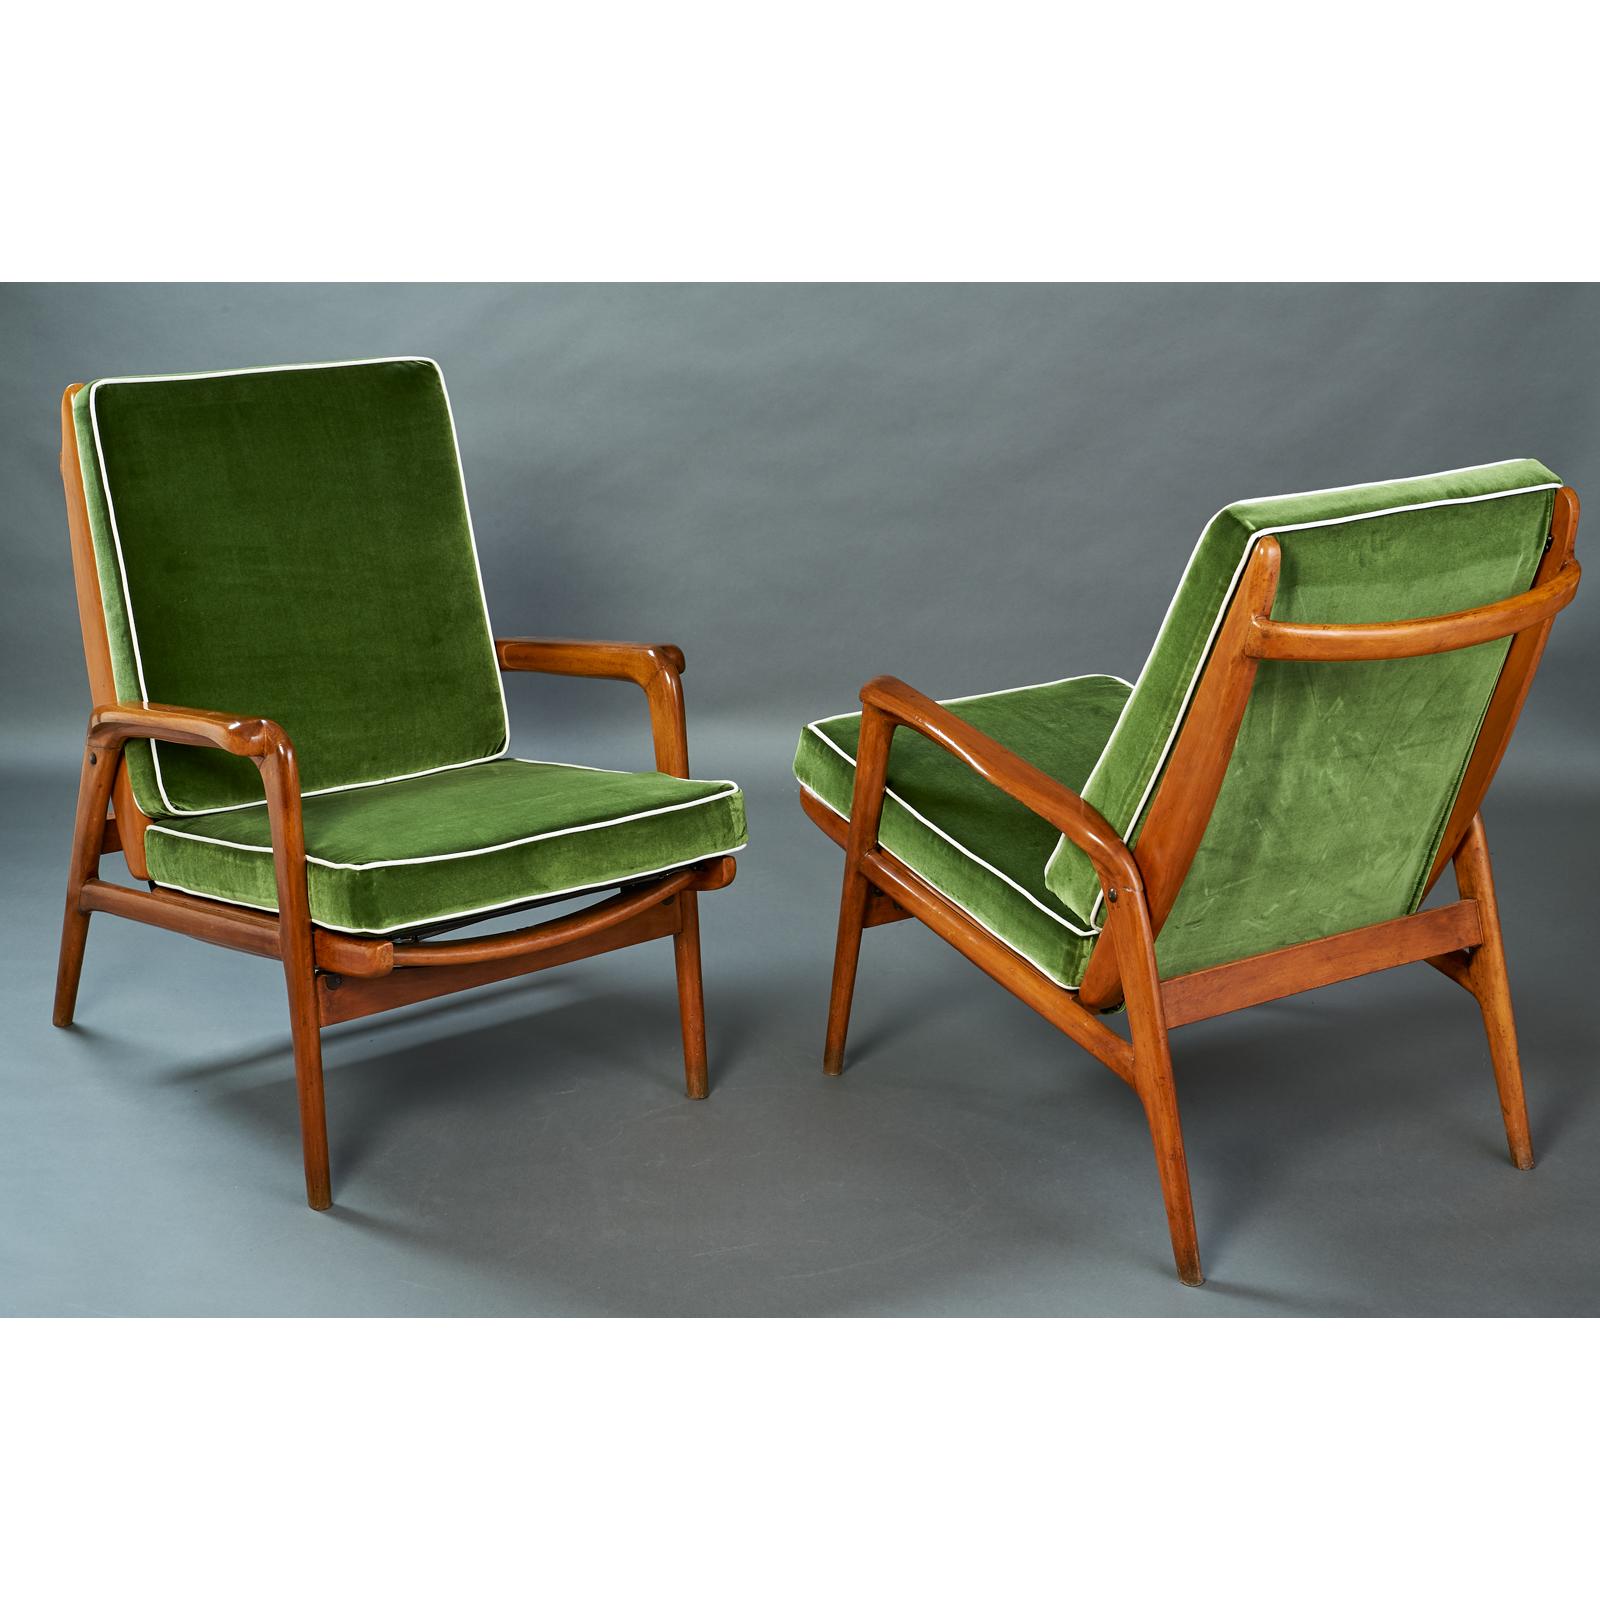 Italy, 1950s
Pair of reclining polished wood armchairs with shaped armrests and back grasp
Dimensions: 26 W x 34 D x 17 high @ seat, 34 H @ back.
